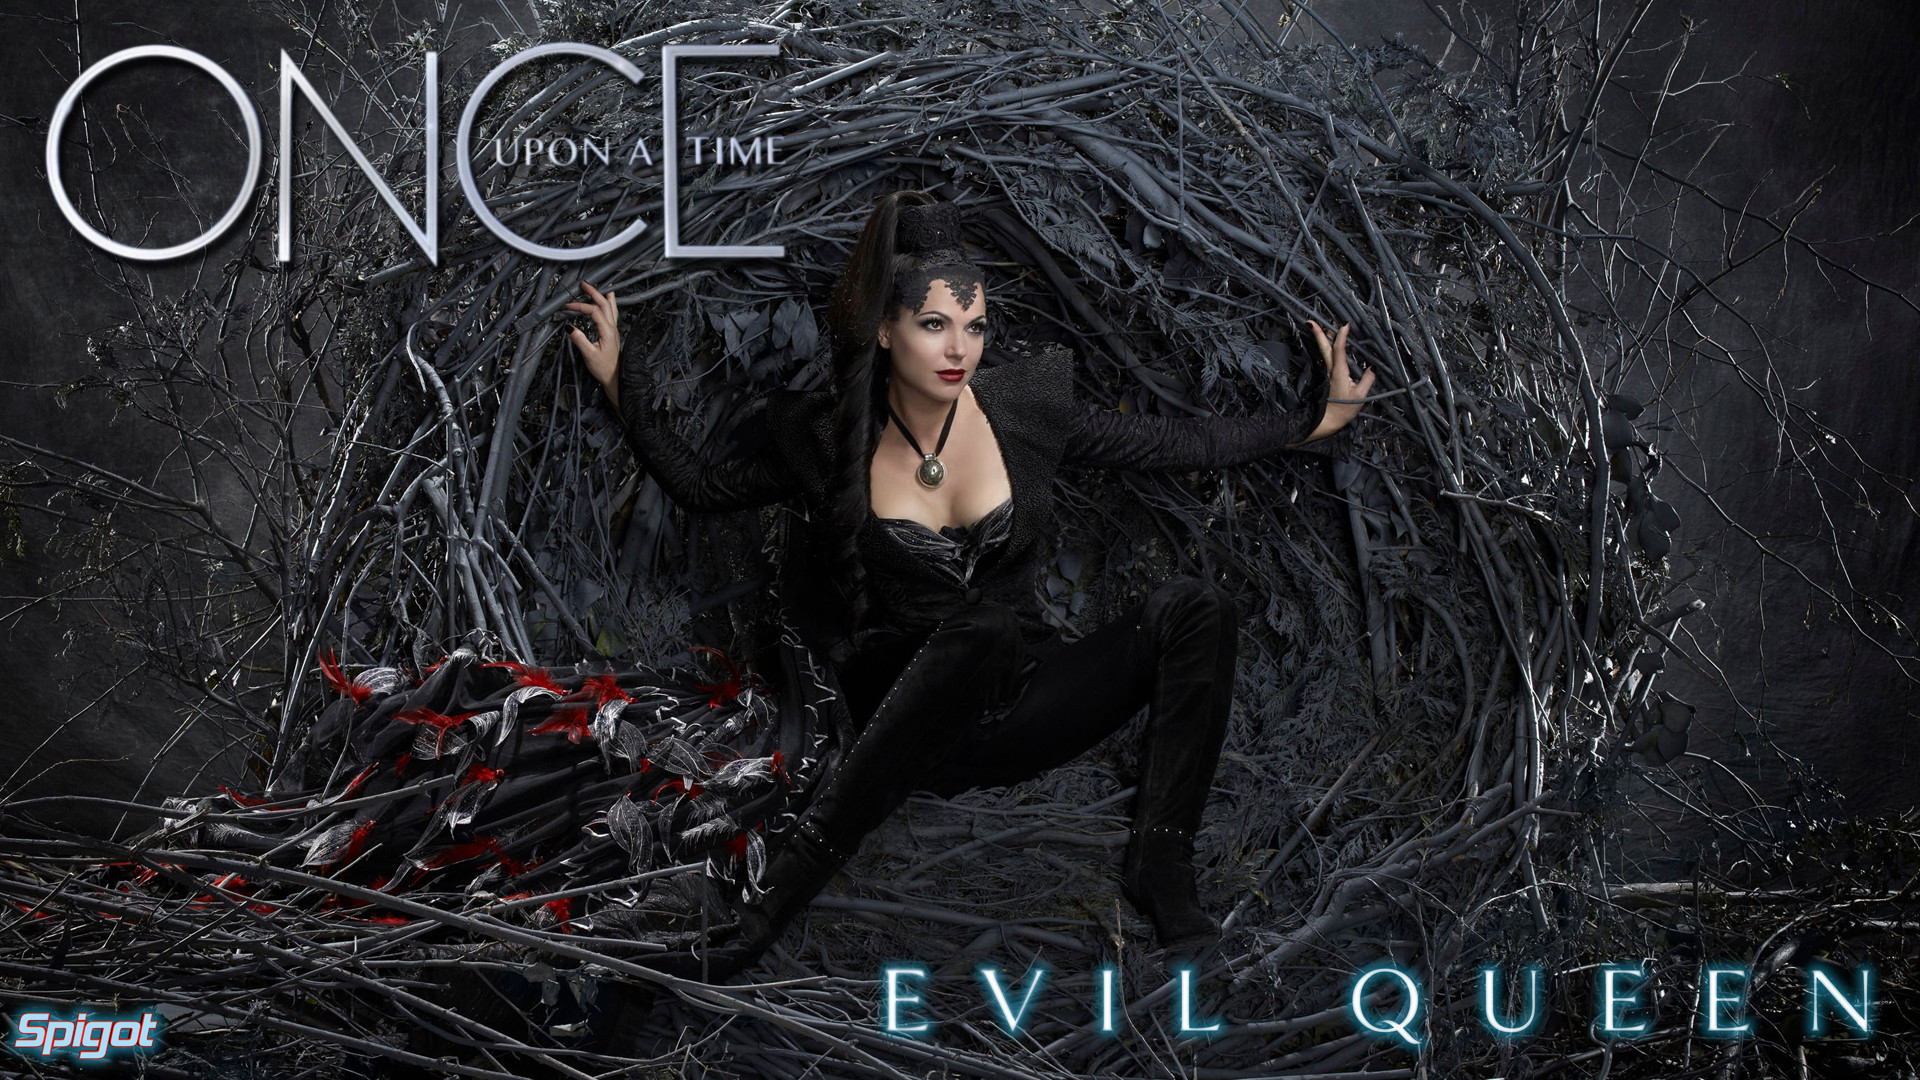 1920x1080 Once Upon A Time Evil Queen Wallpaper George Spigots Blog 